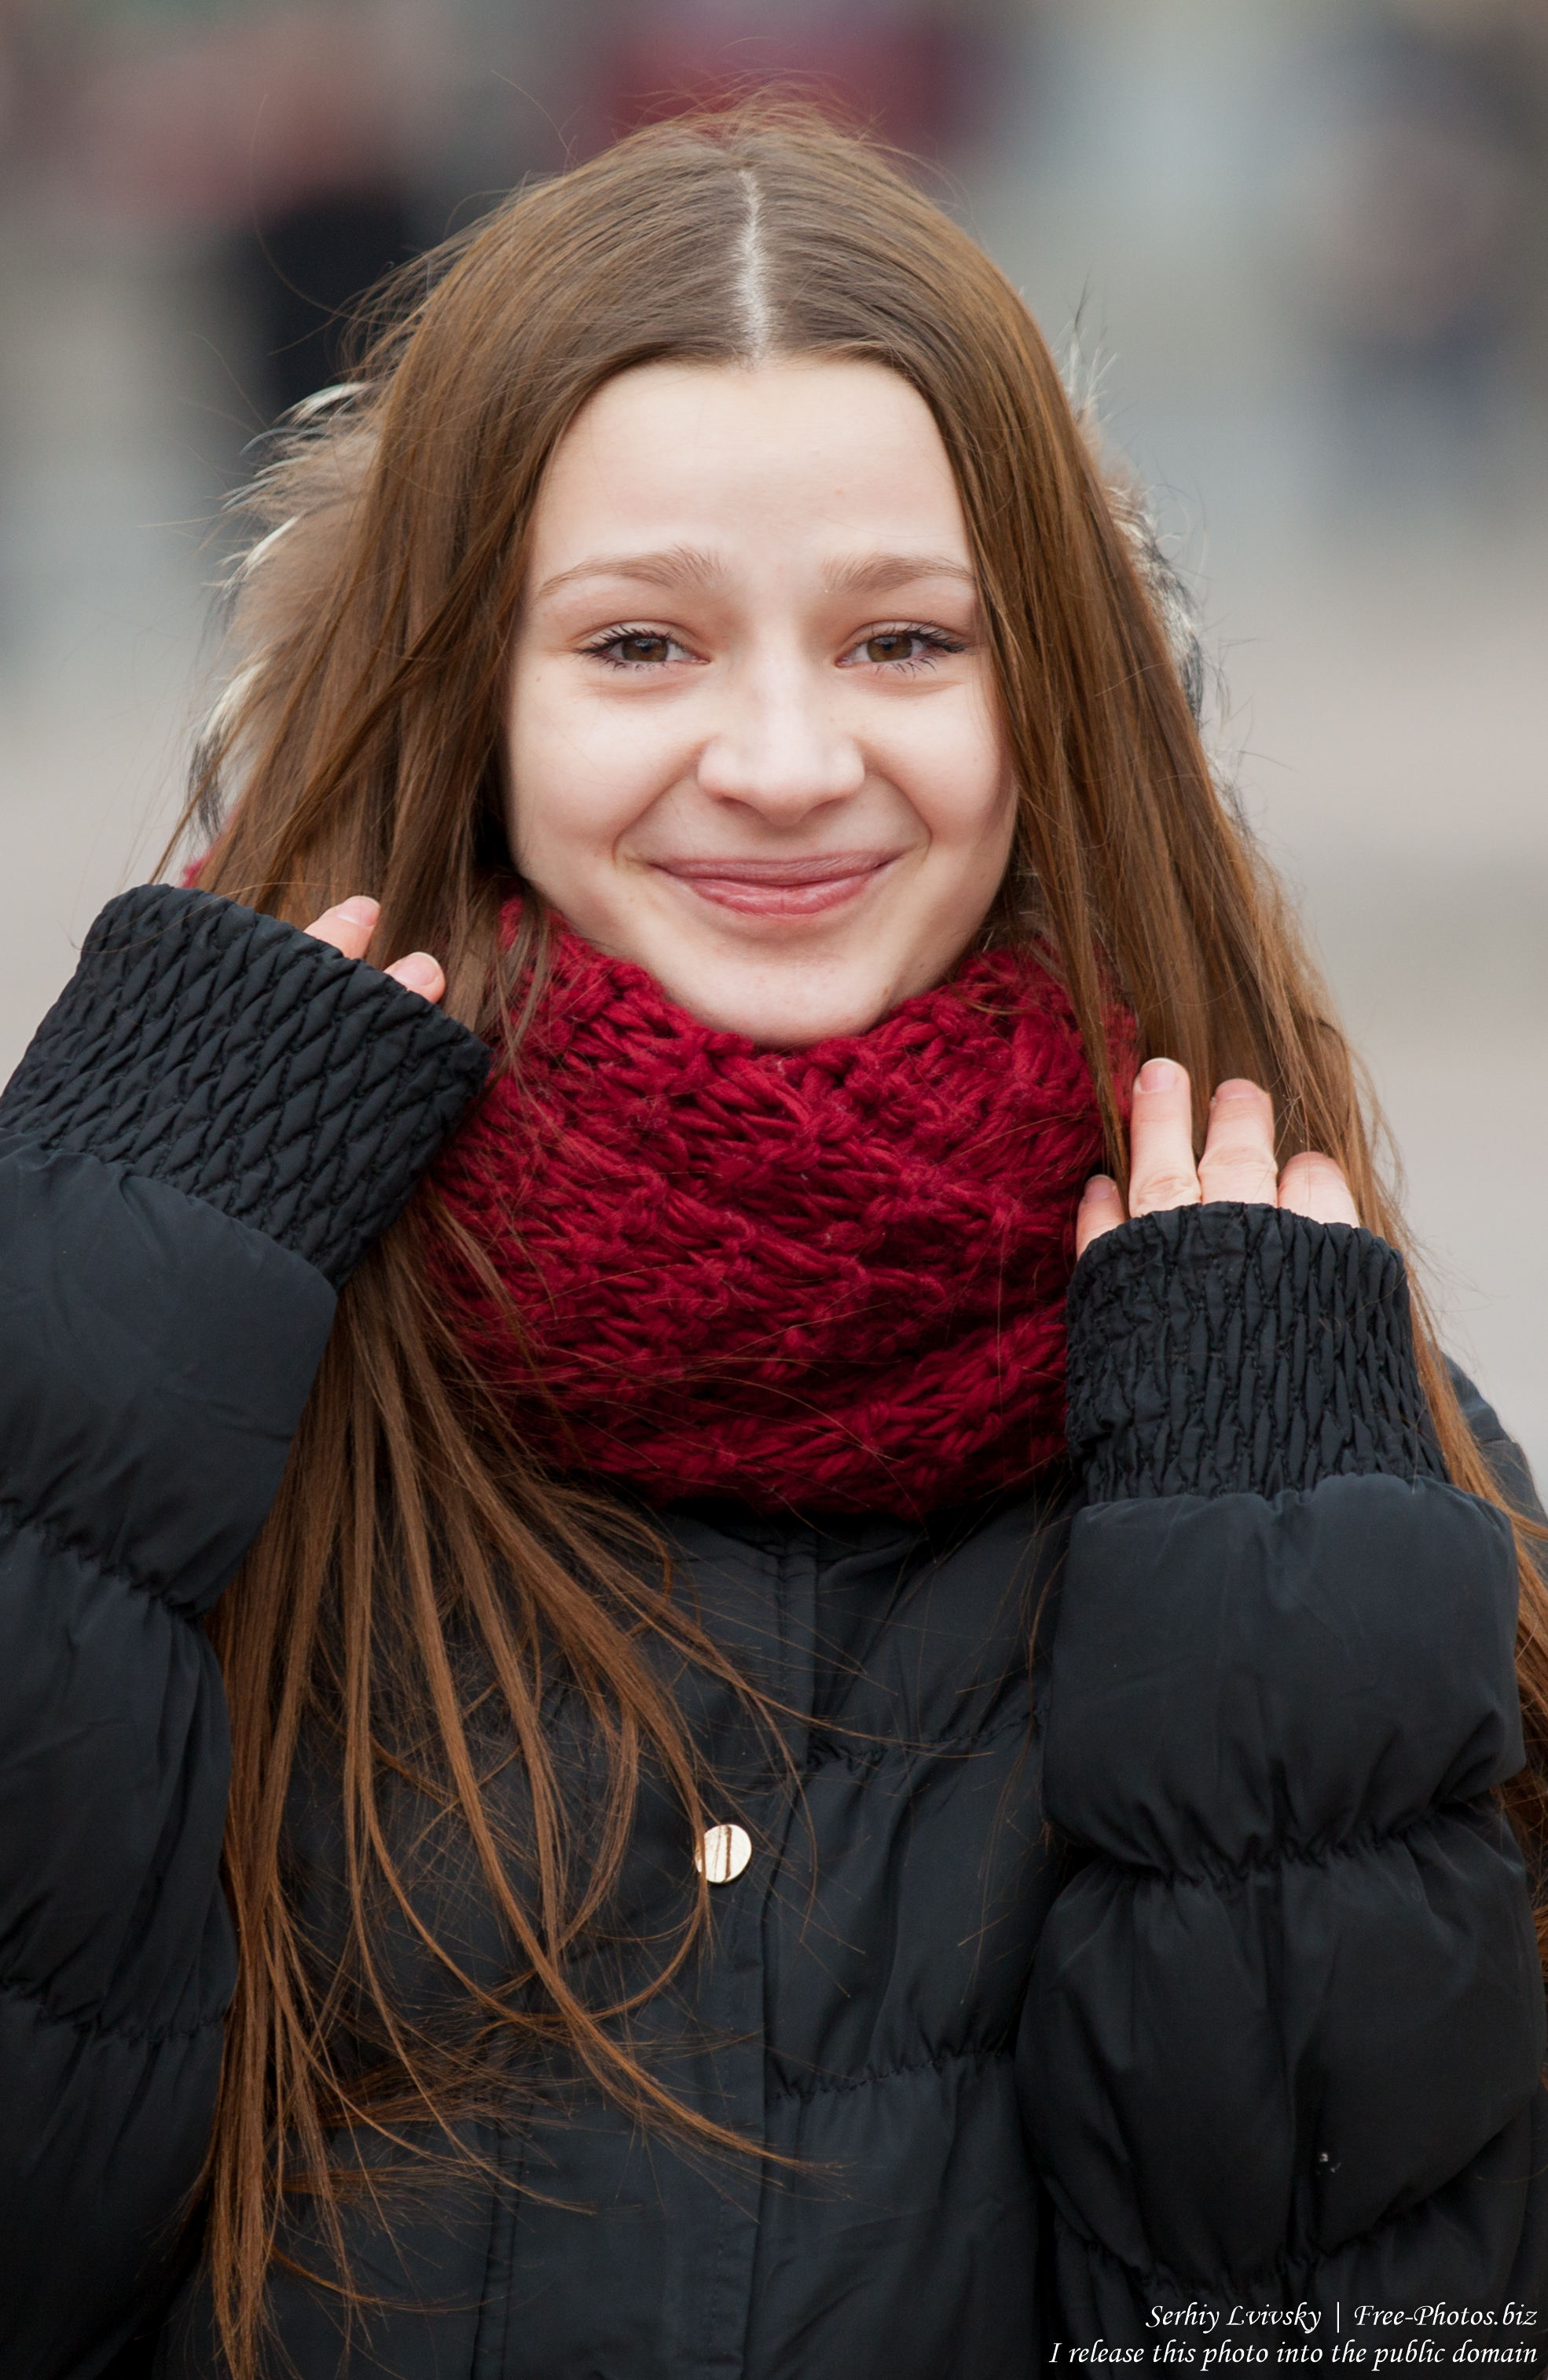 a cute girl photographed in February 2015